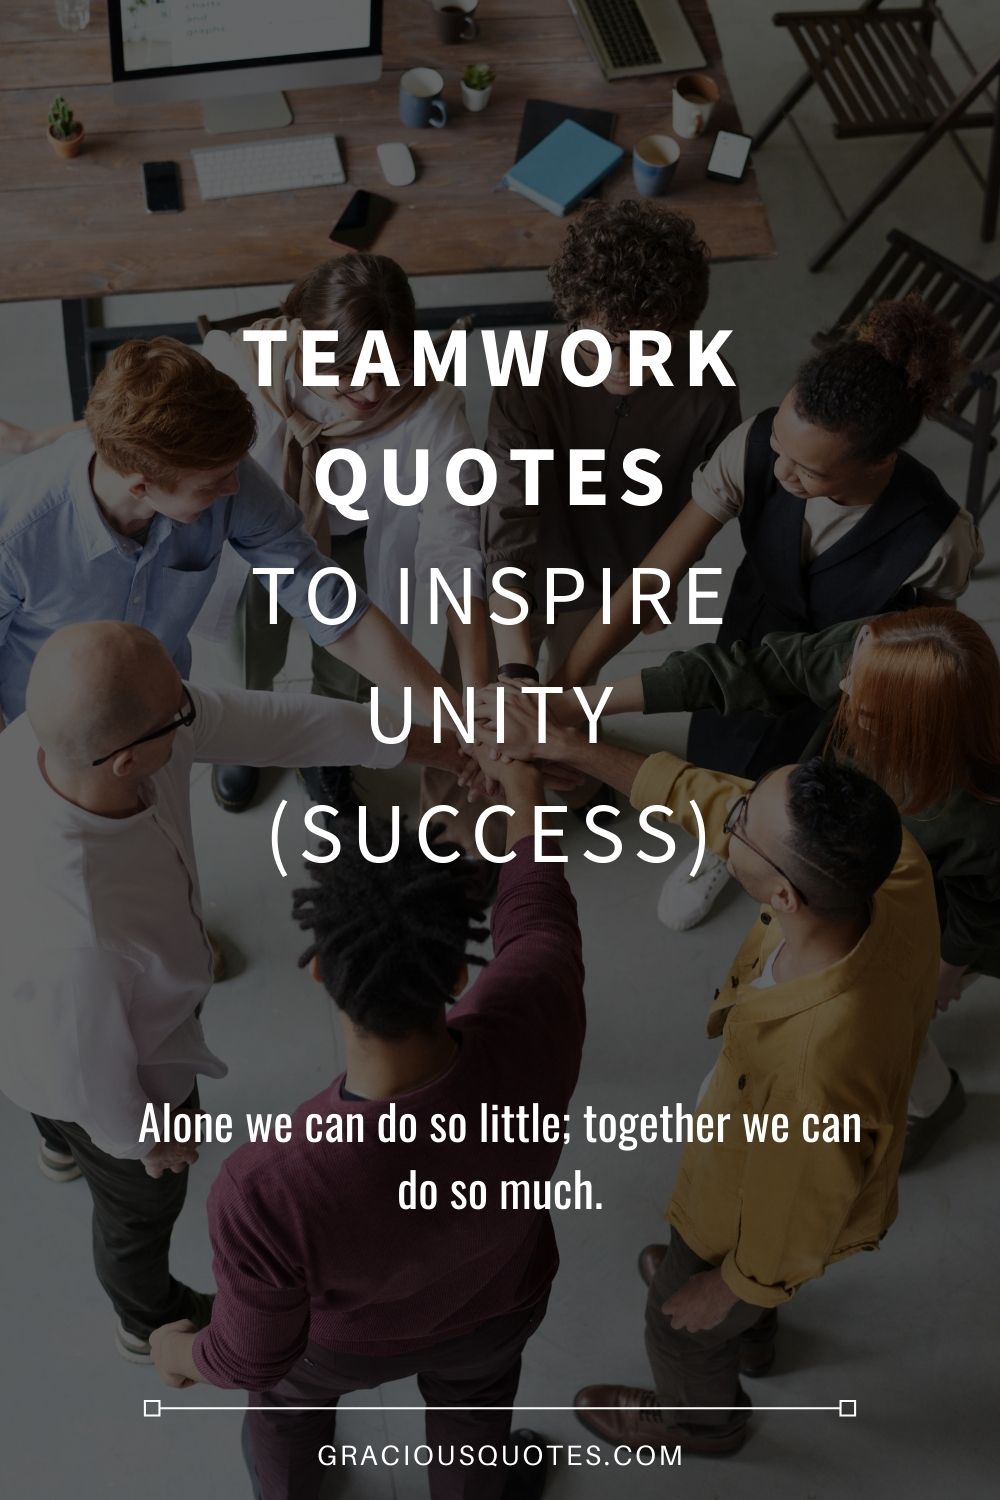 Teamwork Quotes to Inspire Unity (SUCCESS) - Gracious Quotes